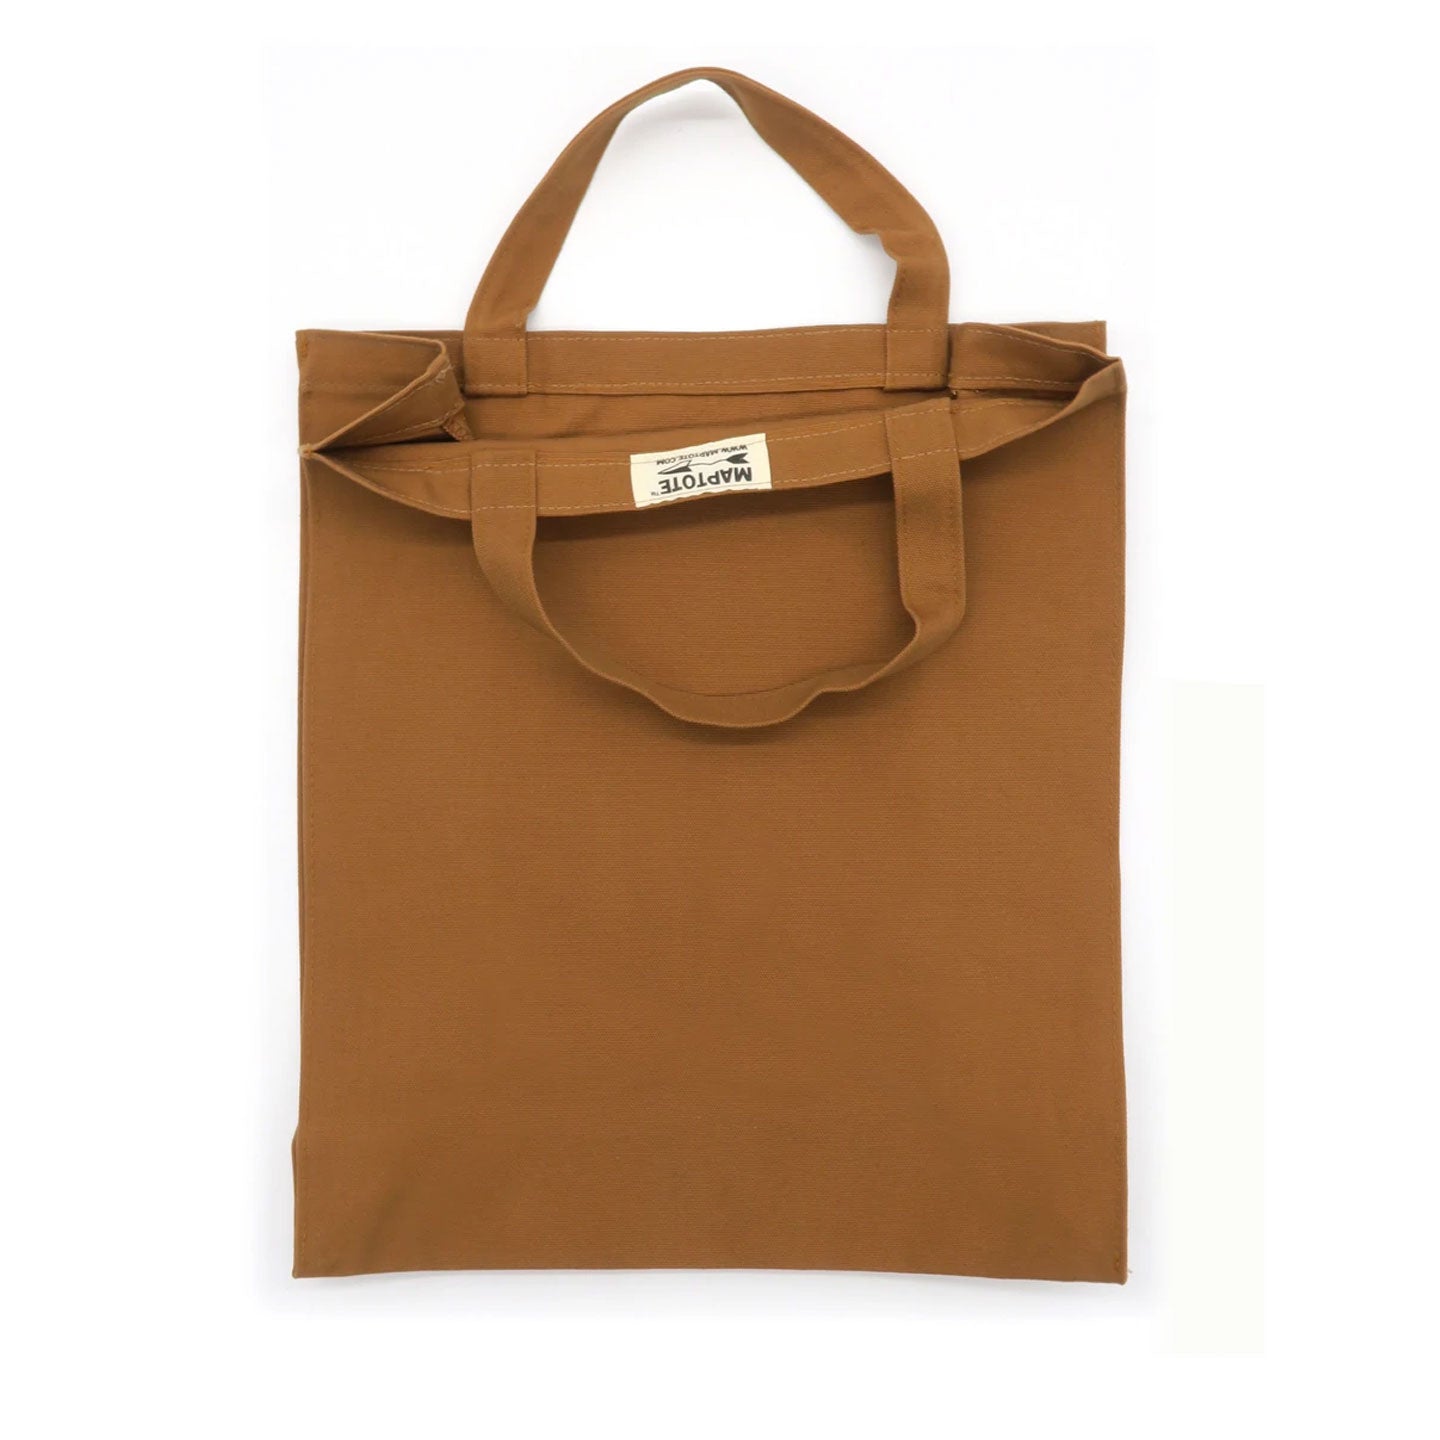 Limelight Snowmass Shopper Tote